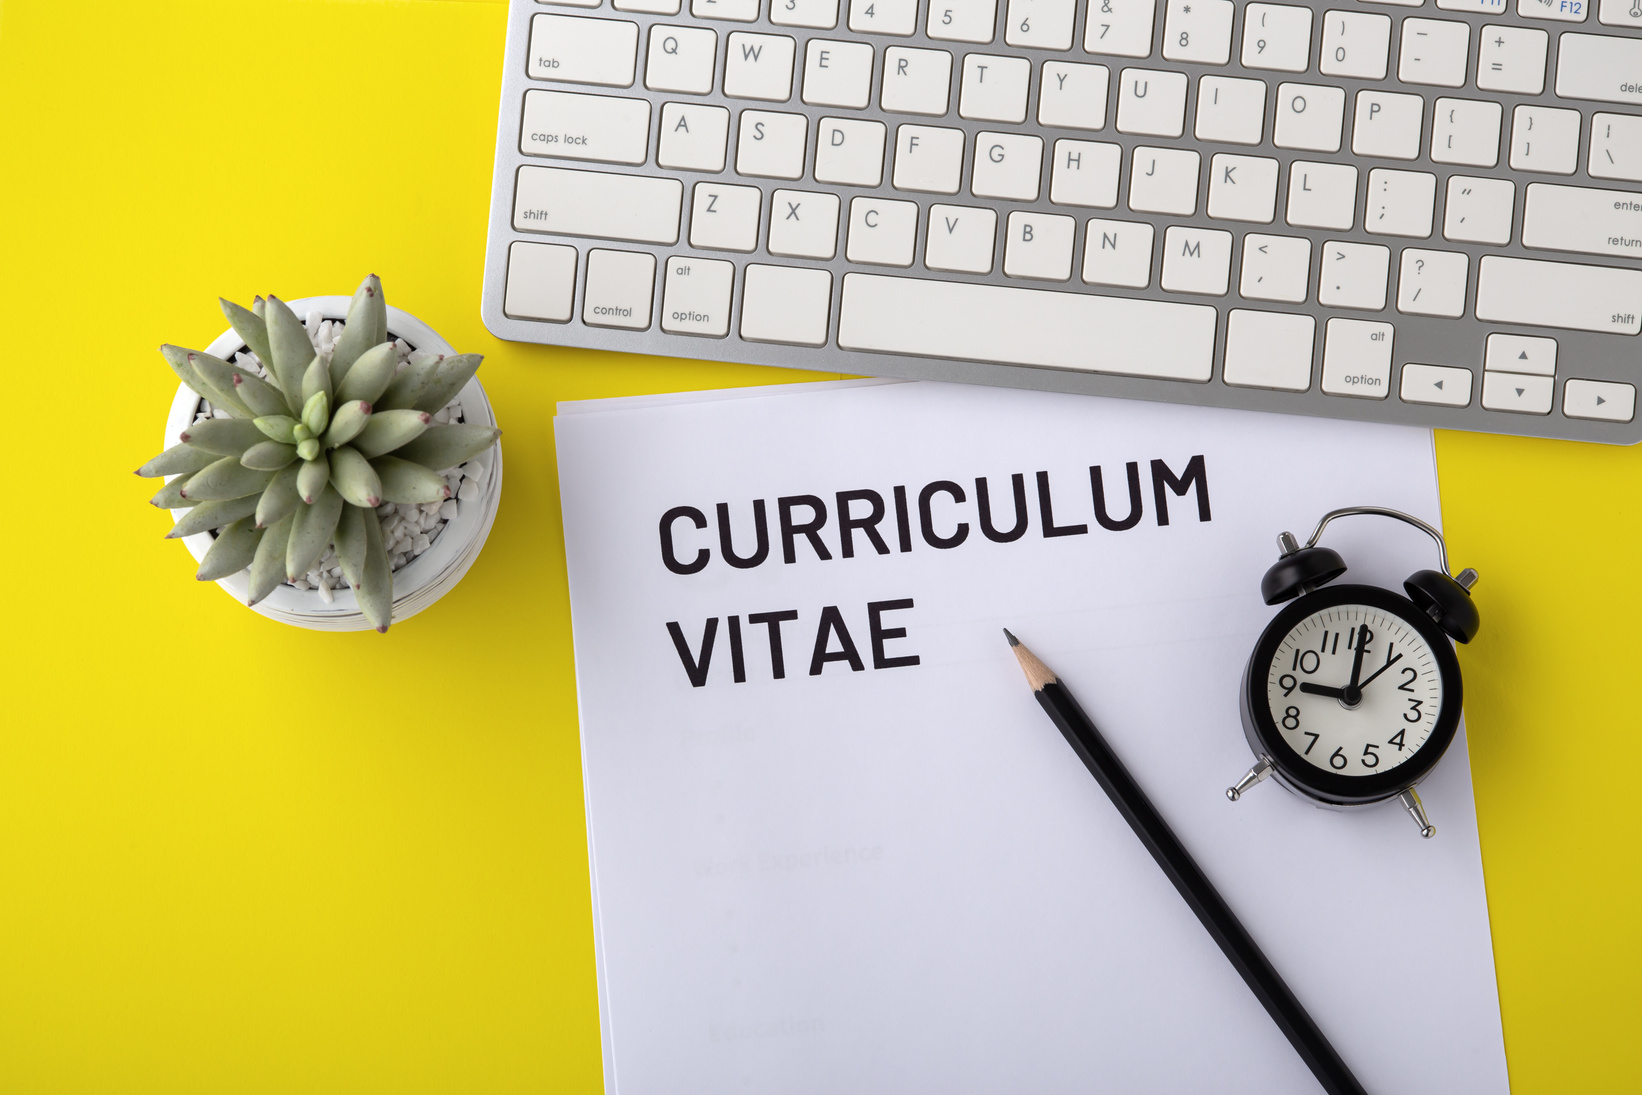 CV with keyboard and clock on yellow background